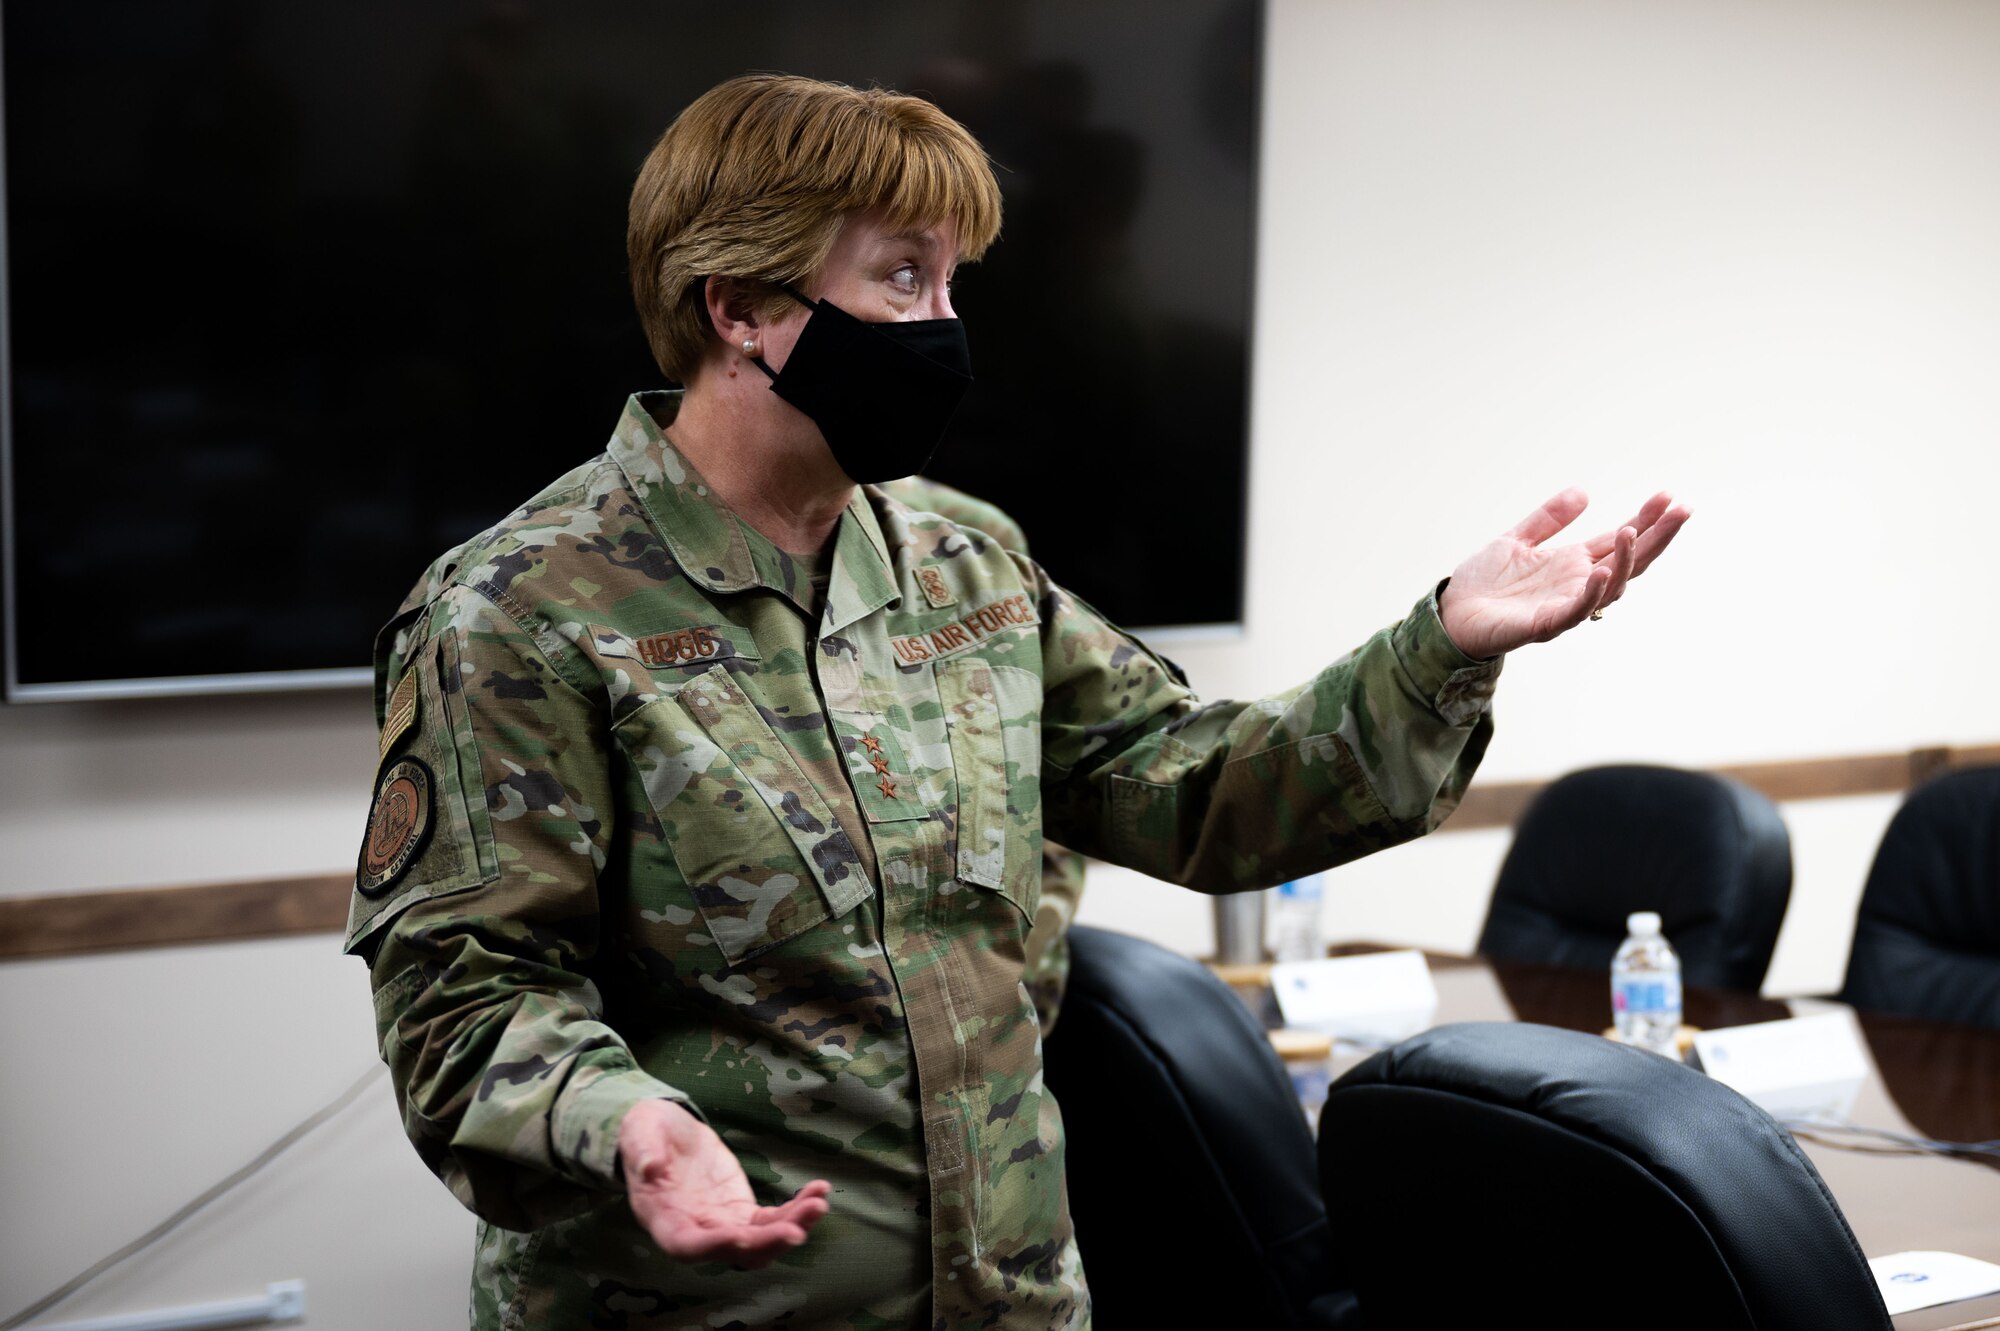 U.S. Air Force Lt. Gen. Dorothy A. Hogg, Air Force Surgeon General, talks to Airmen from the 354th Medical Group during a leadership visit at Eielson Air Force Base, Alaska, April 27, 2021.